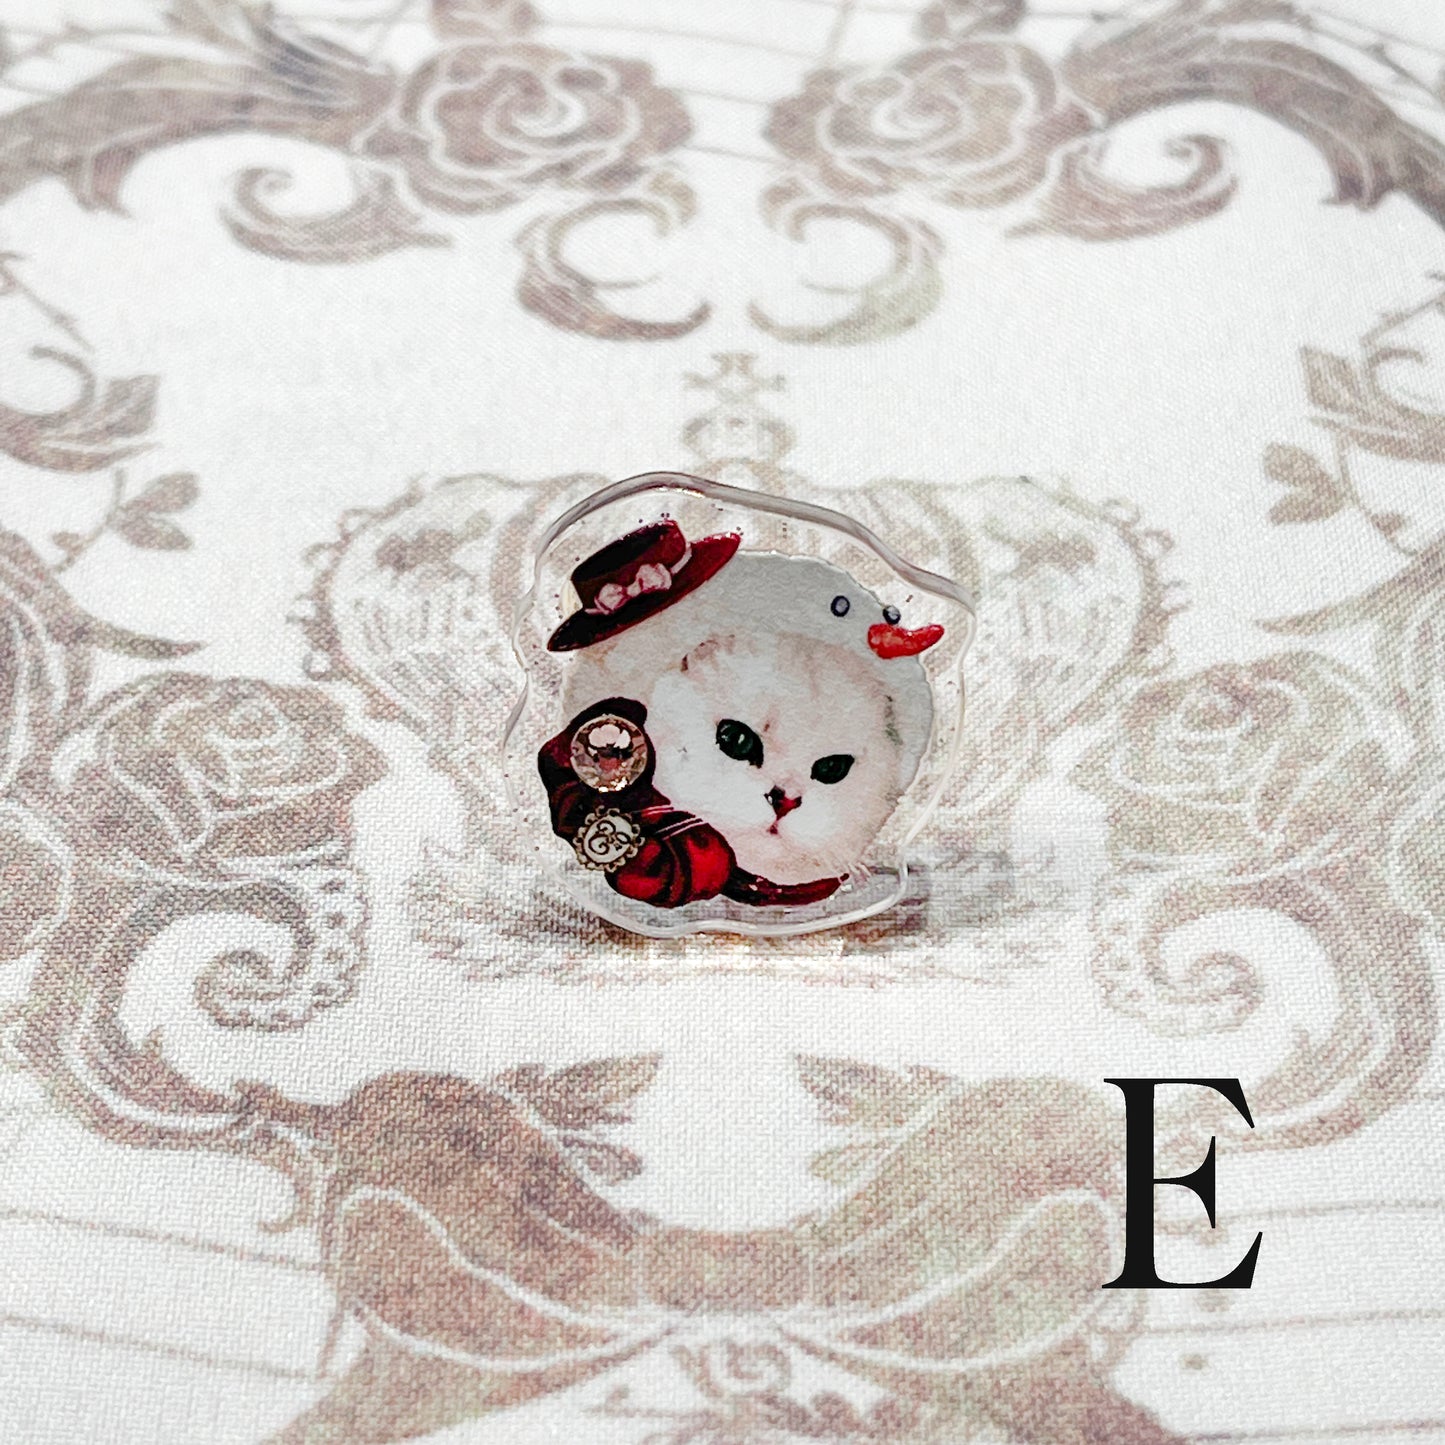 Dolled Up Ring - Cat Series